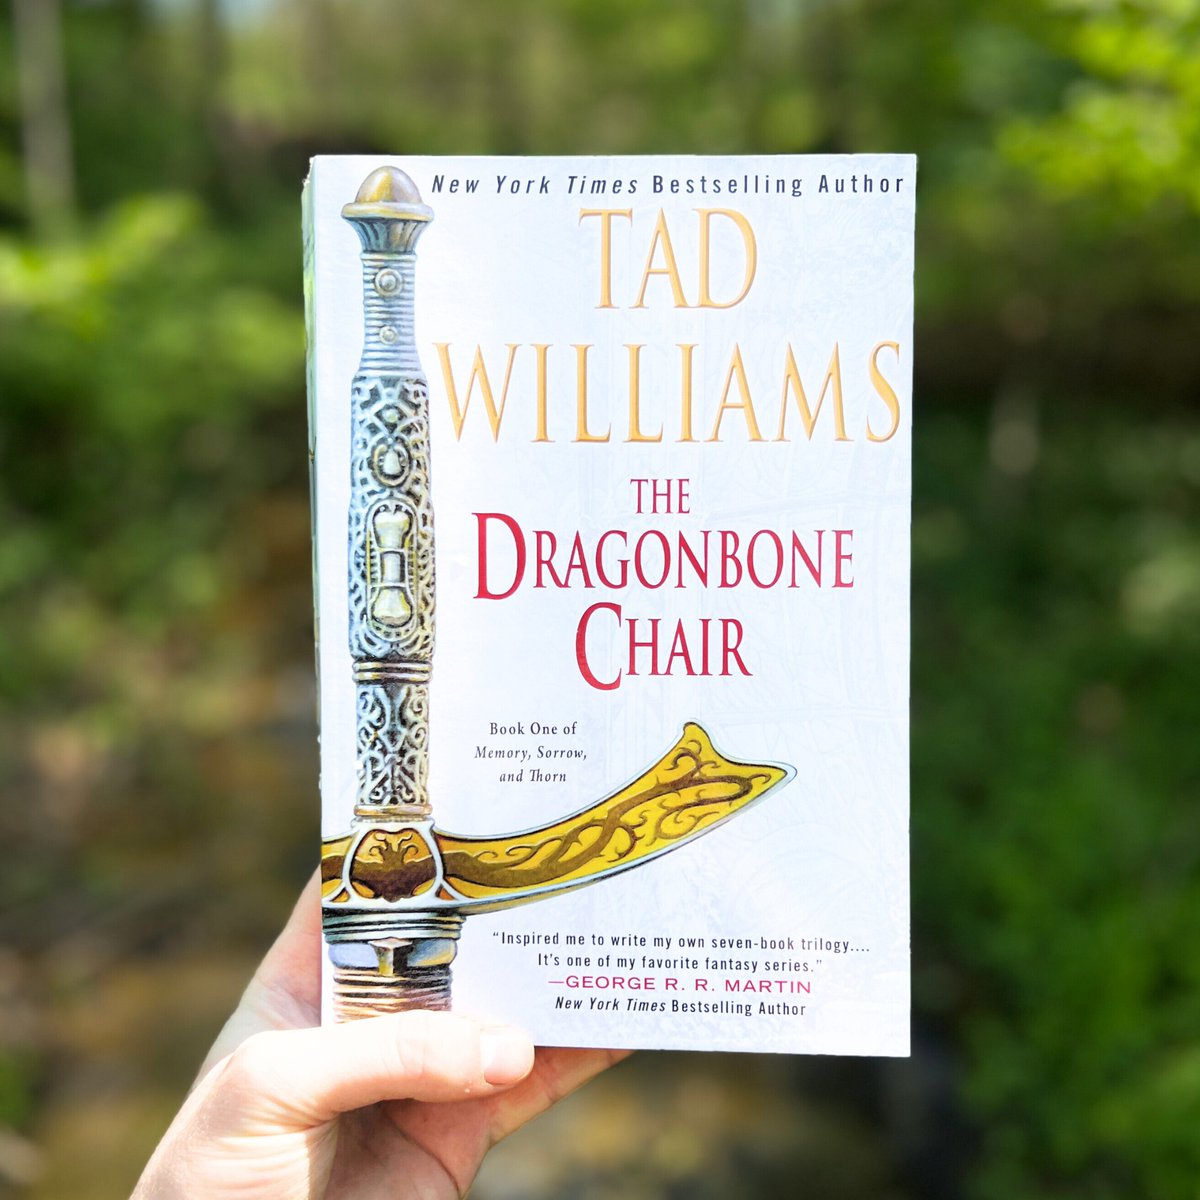 “A piece of writing is a trap,” he said cheerily, “and the best kind. A book, you see, is the only kind of trap that keeps its captive—which is knowledge—alive forever.” - Tad Williams, The Dragonbone Chair